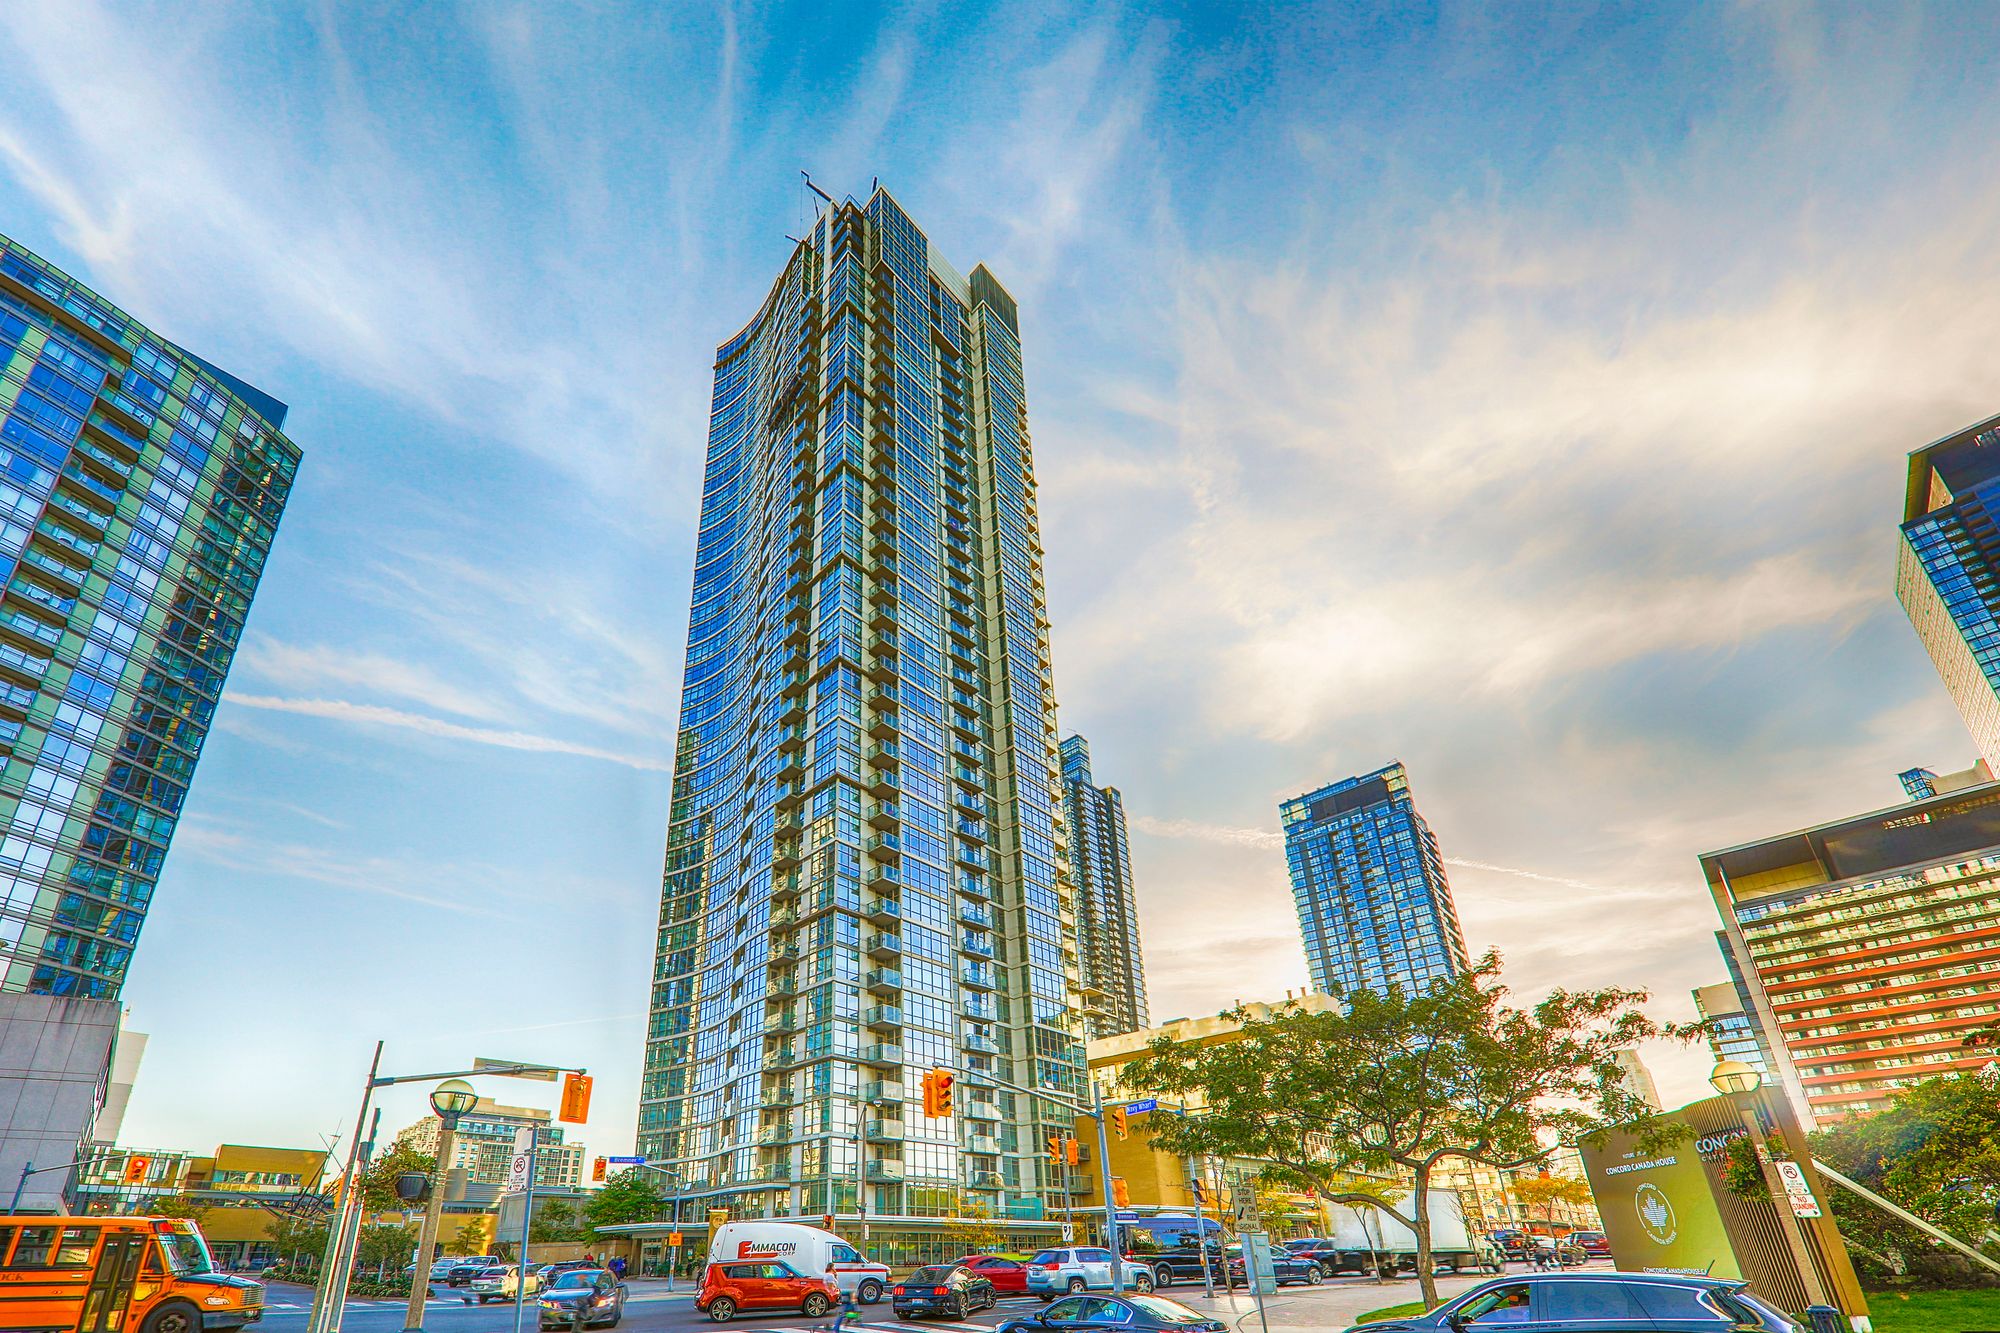 10 Navy Wharf Crt. This condo at Harbour View Estates I Condos is located in  Downtown, Toronto - image #1 of 4 by Strata.ca